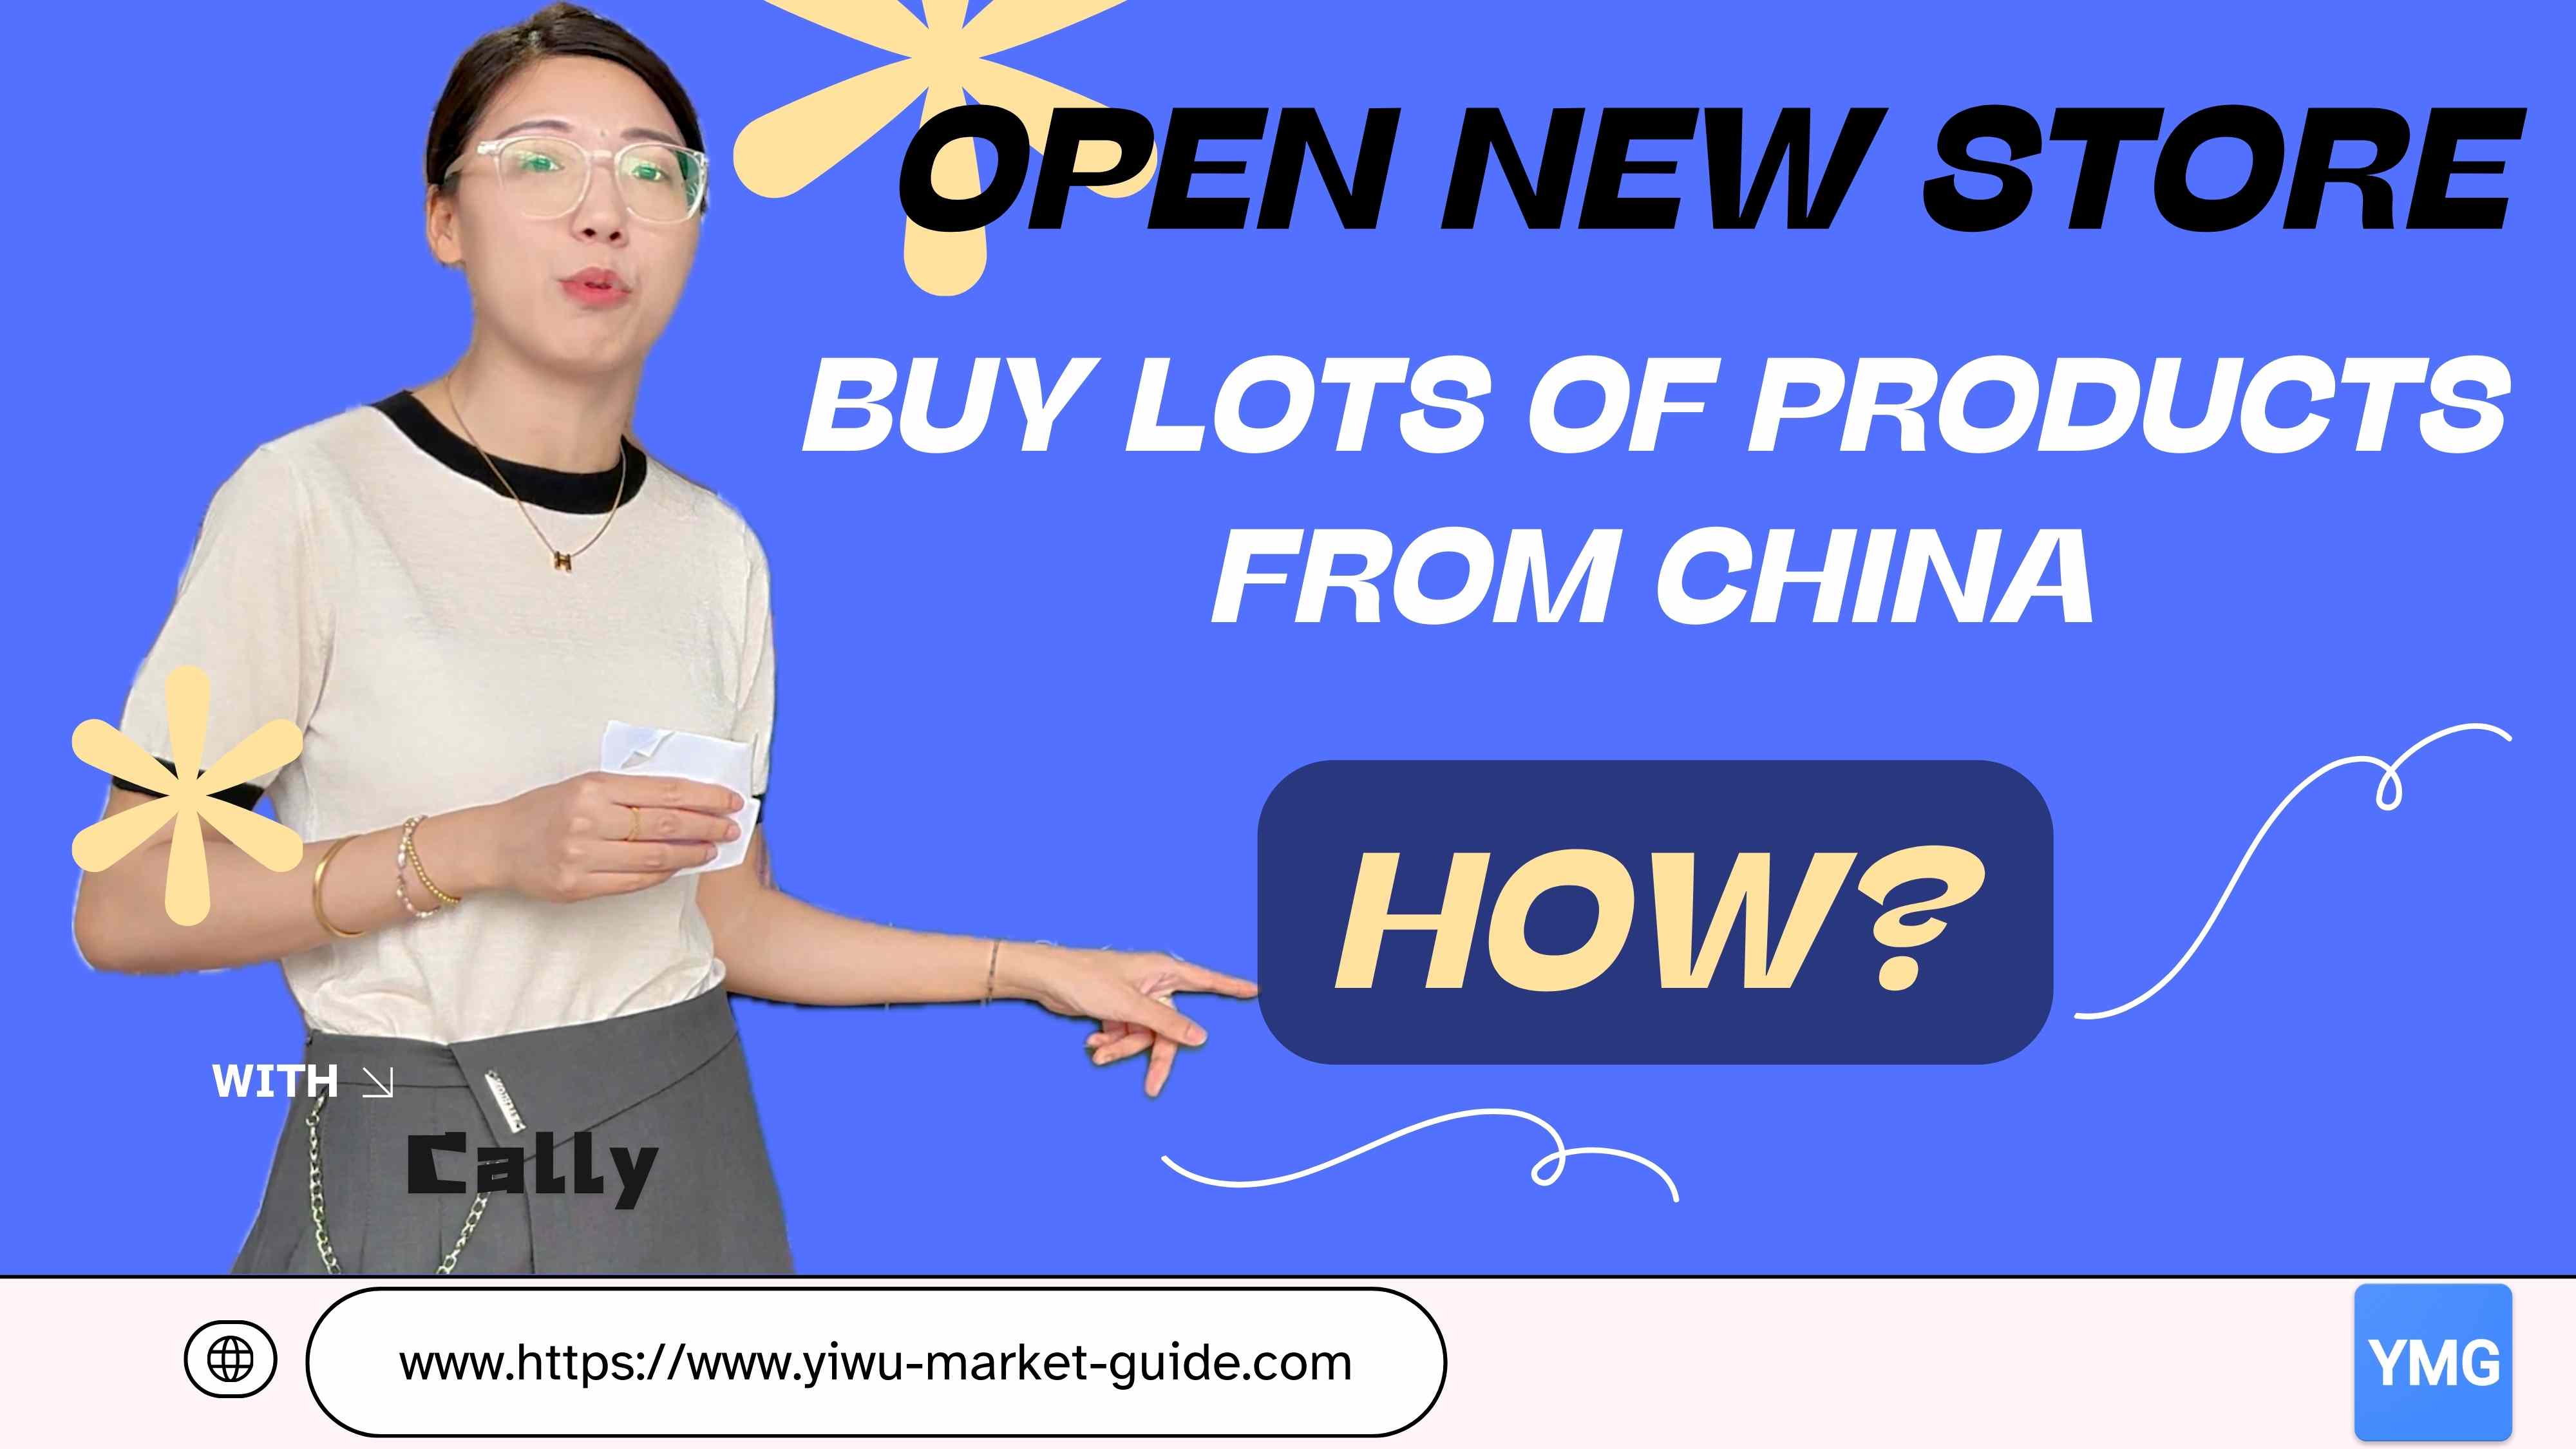 Open New Store, Buy LOTS OF Products From China, HOW？